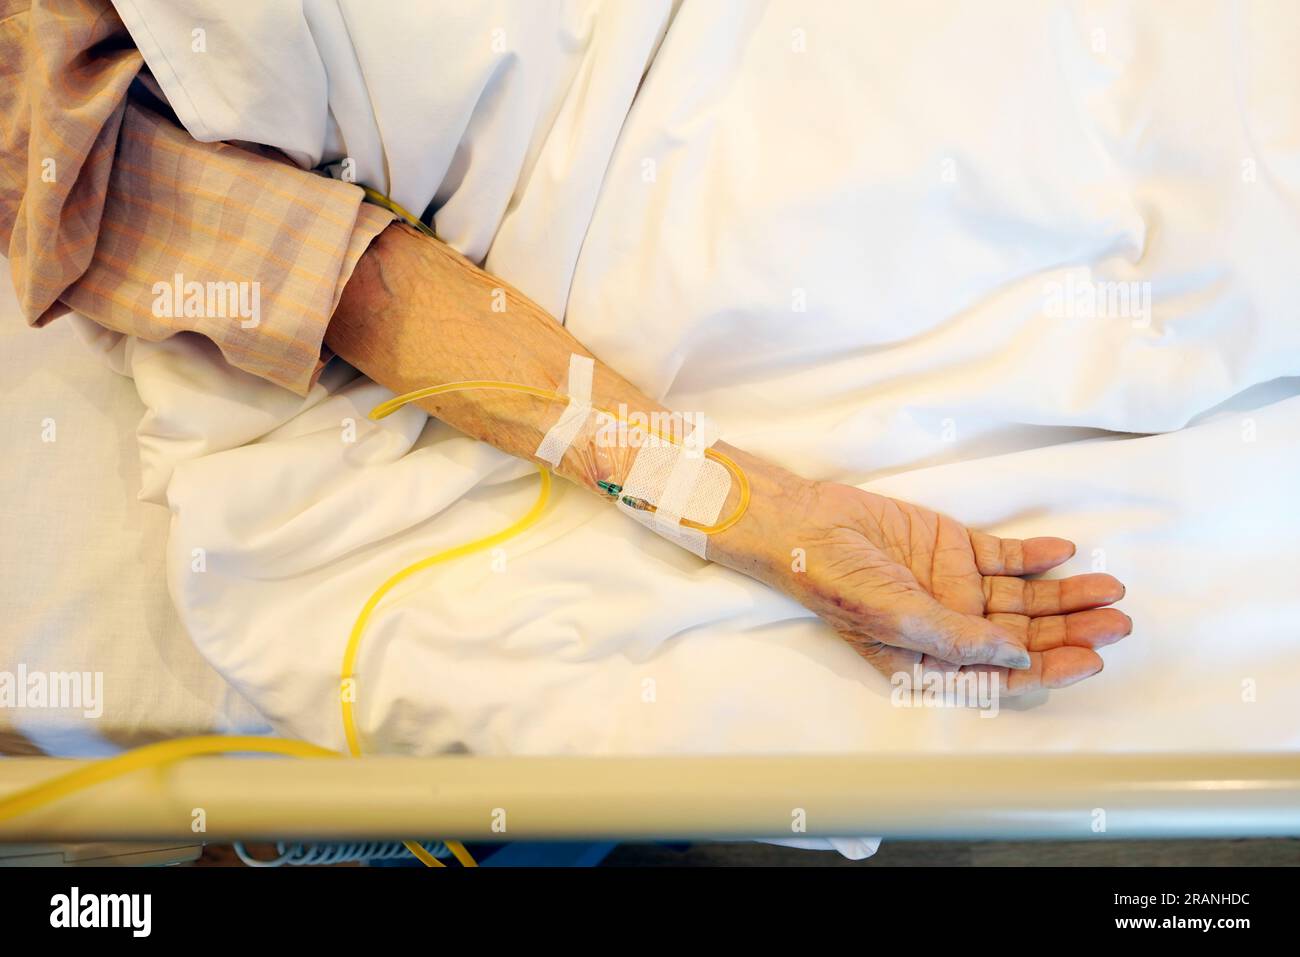 Closeup of elderly patient hand with intravenous drip at the hospital bed Stock Photo